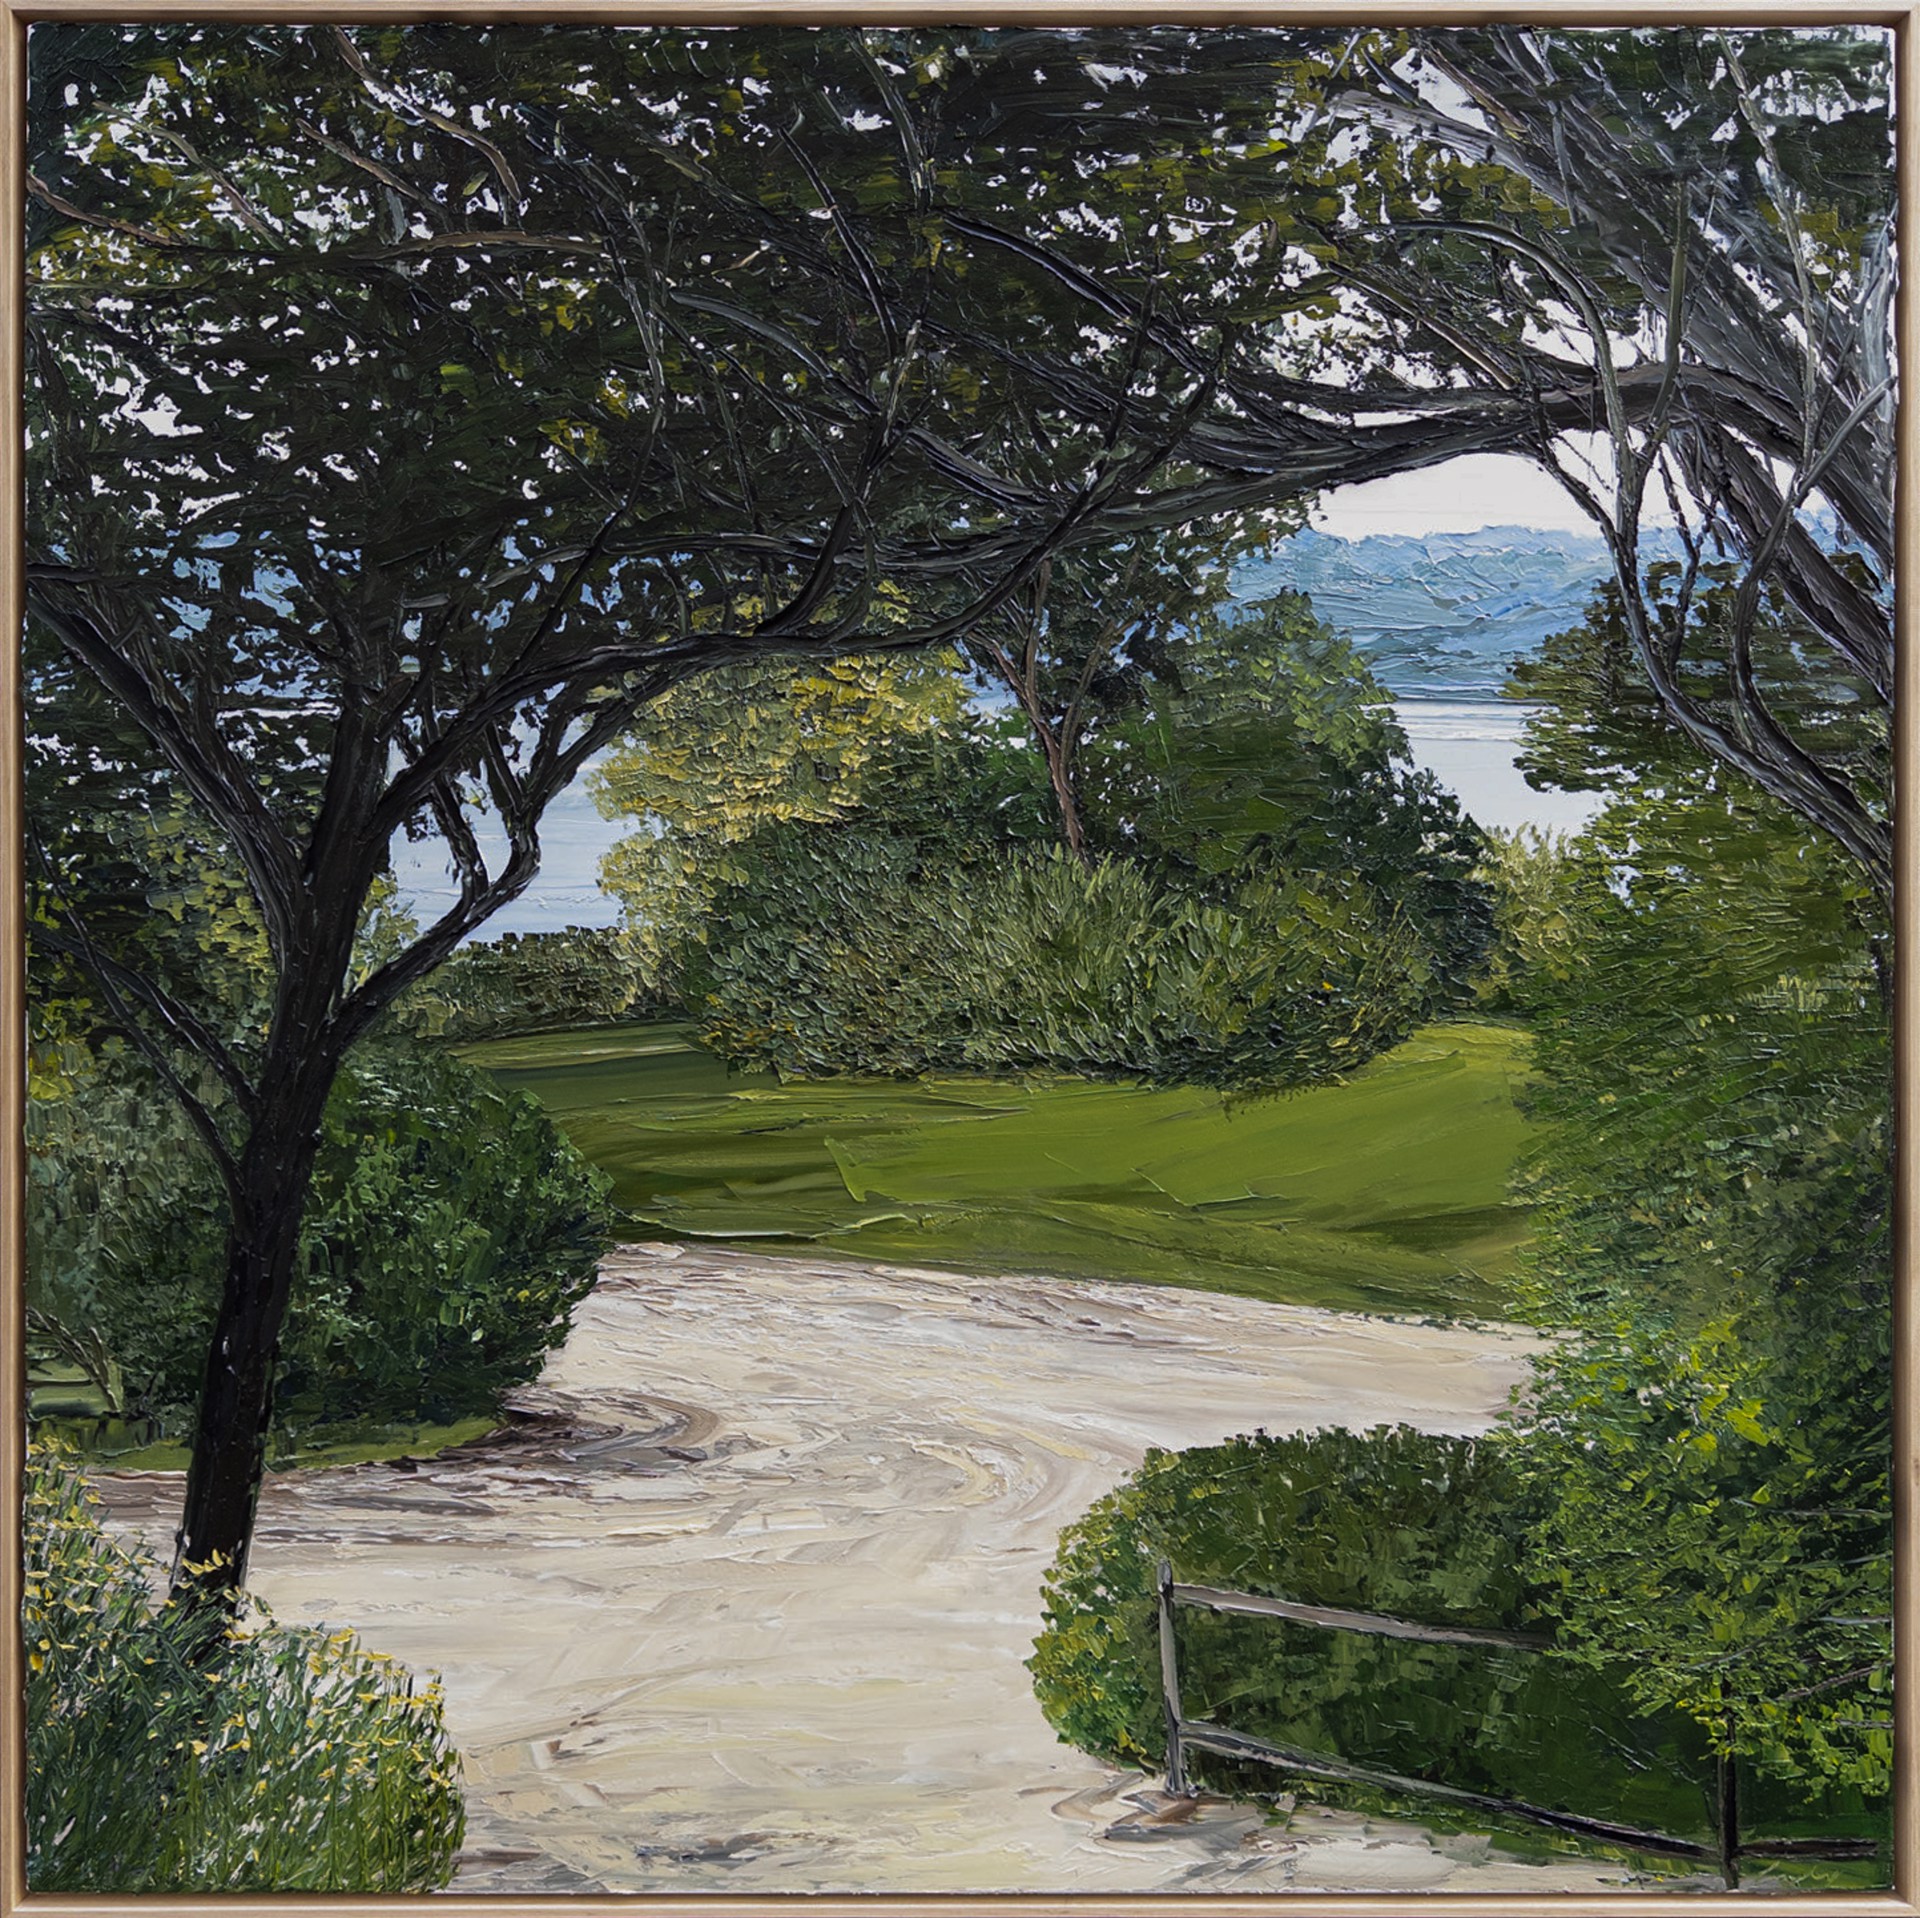 Sea Through Trees at Bass Park (Flinders Golf Course) by Emily Persson